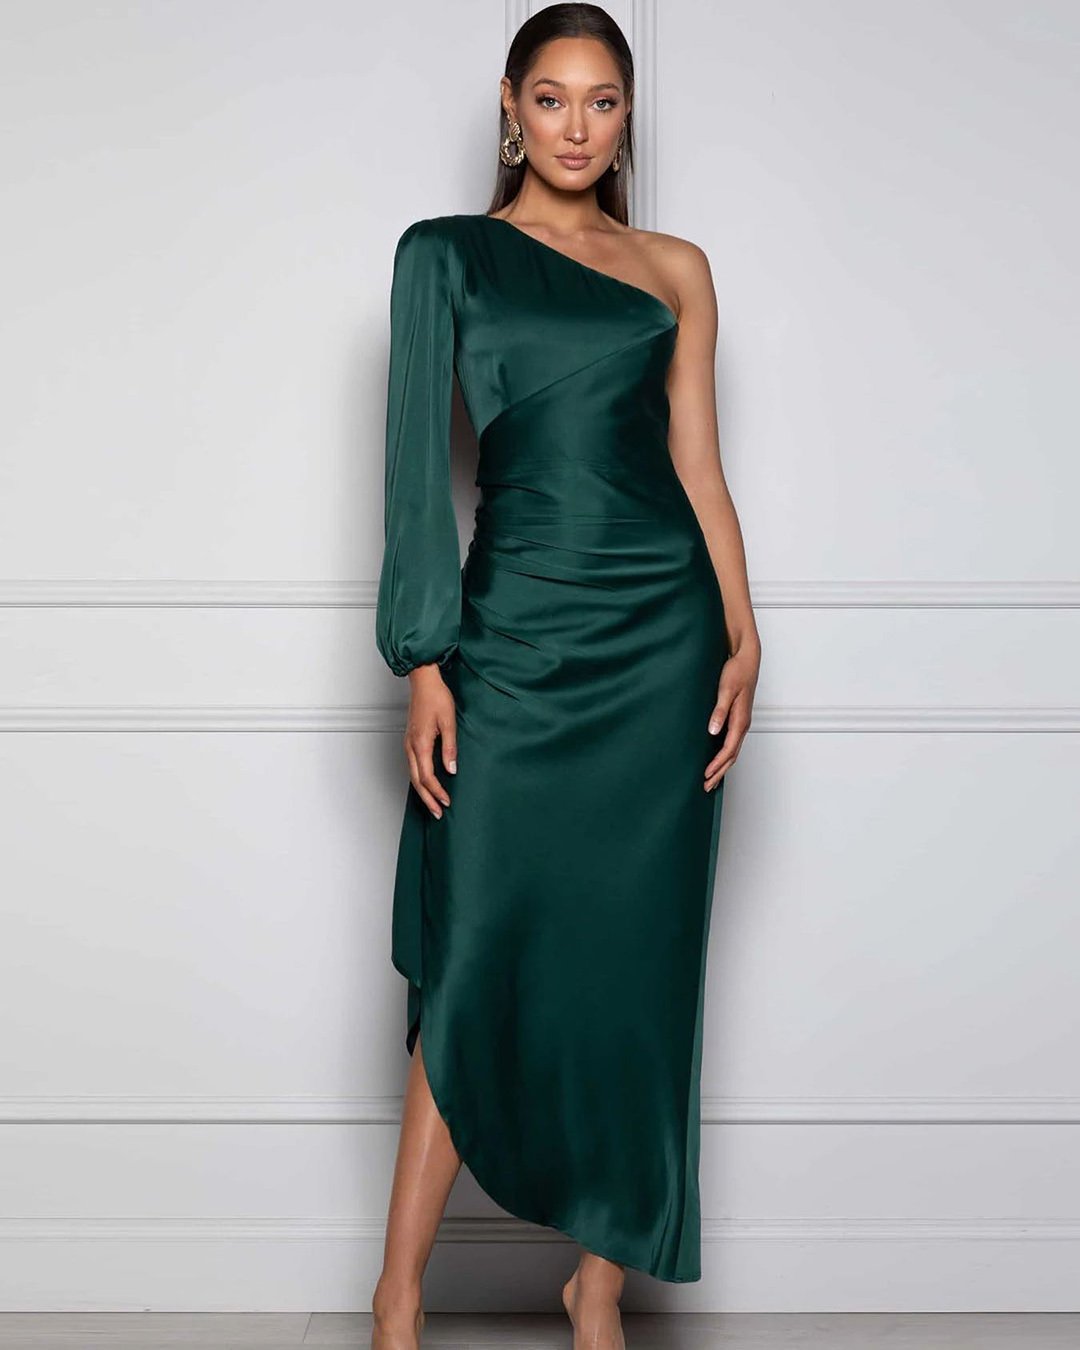 wedding guest dresses sheath with sleeves green simple whiterunway